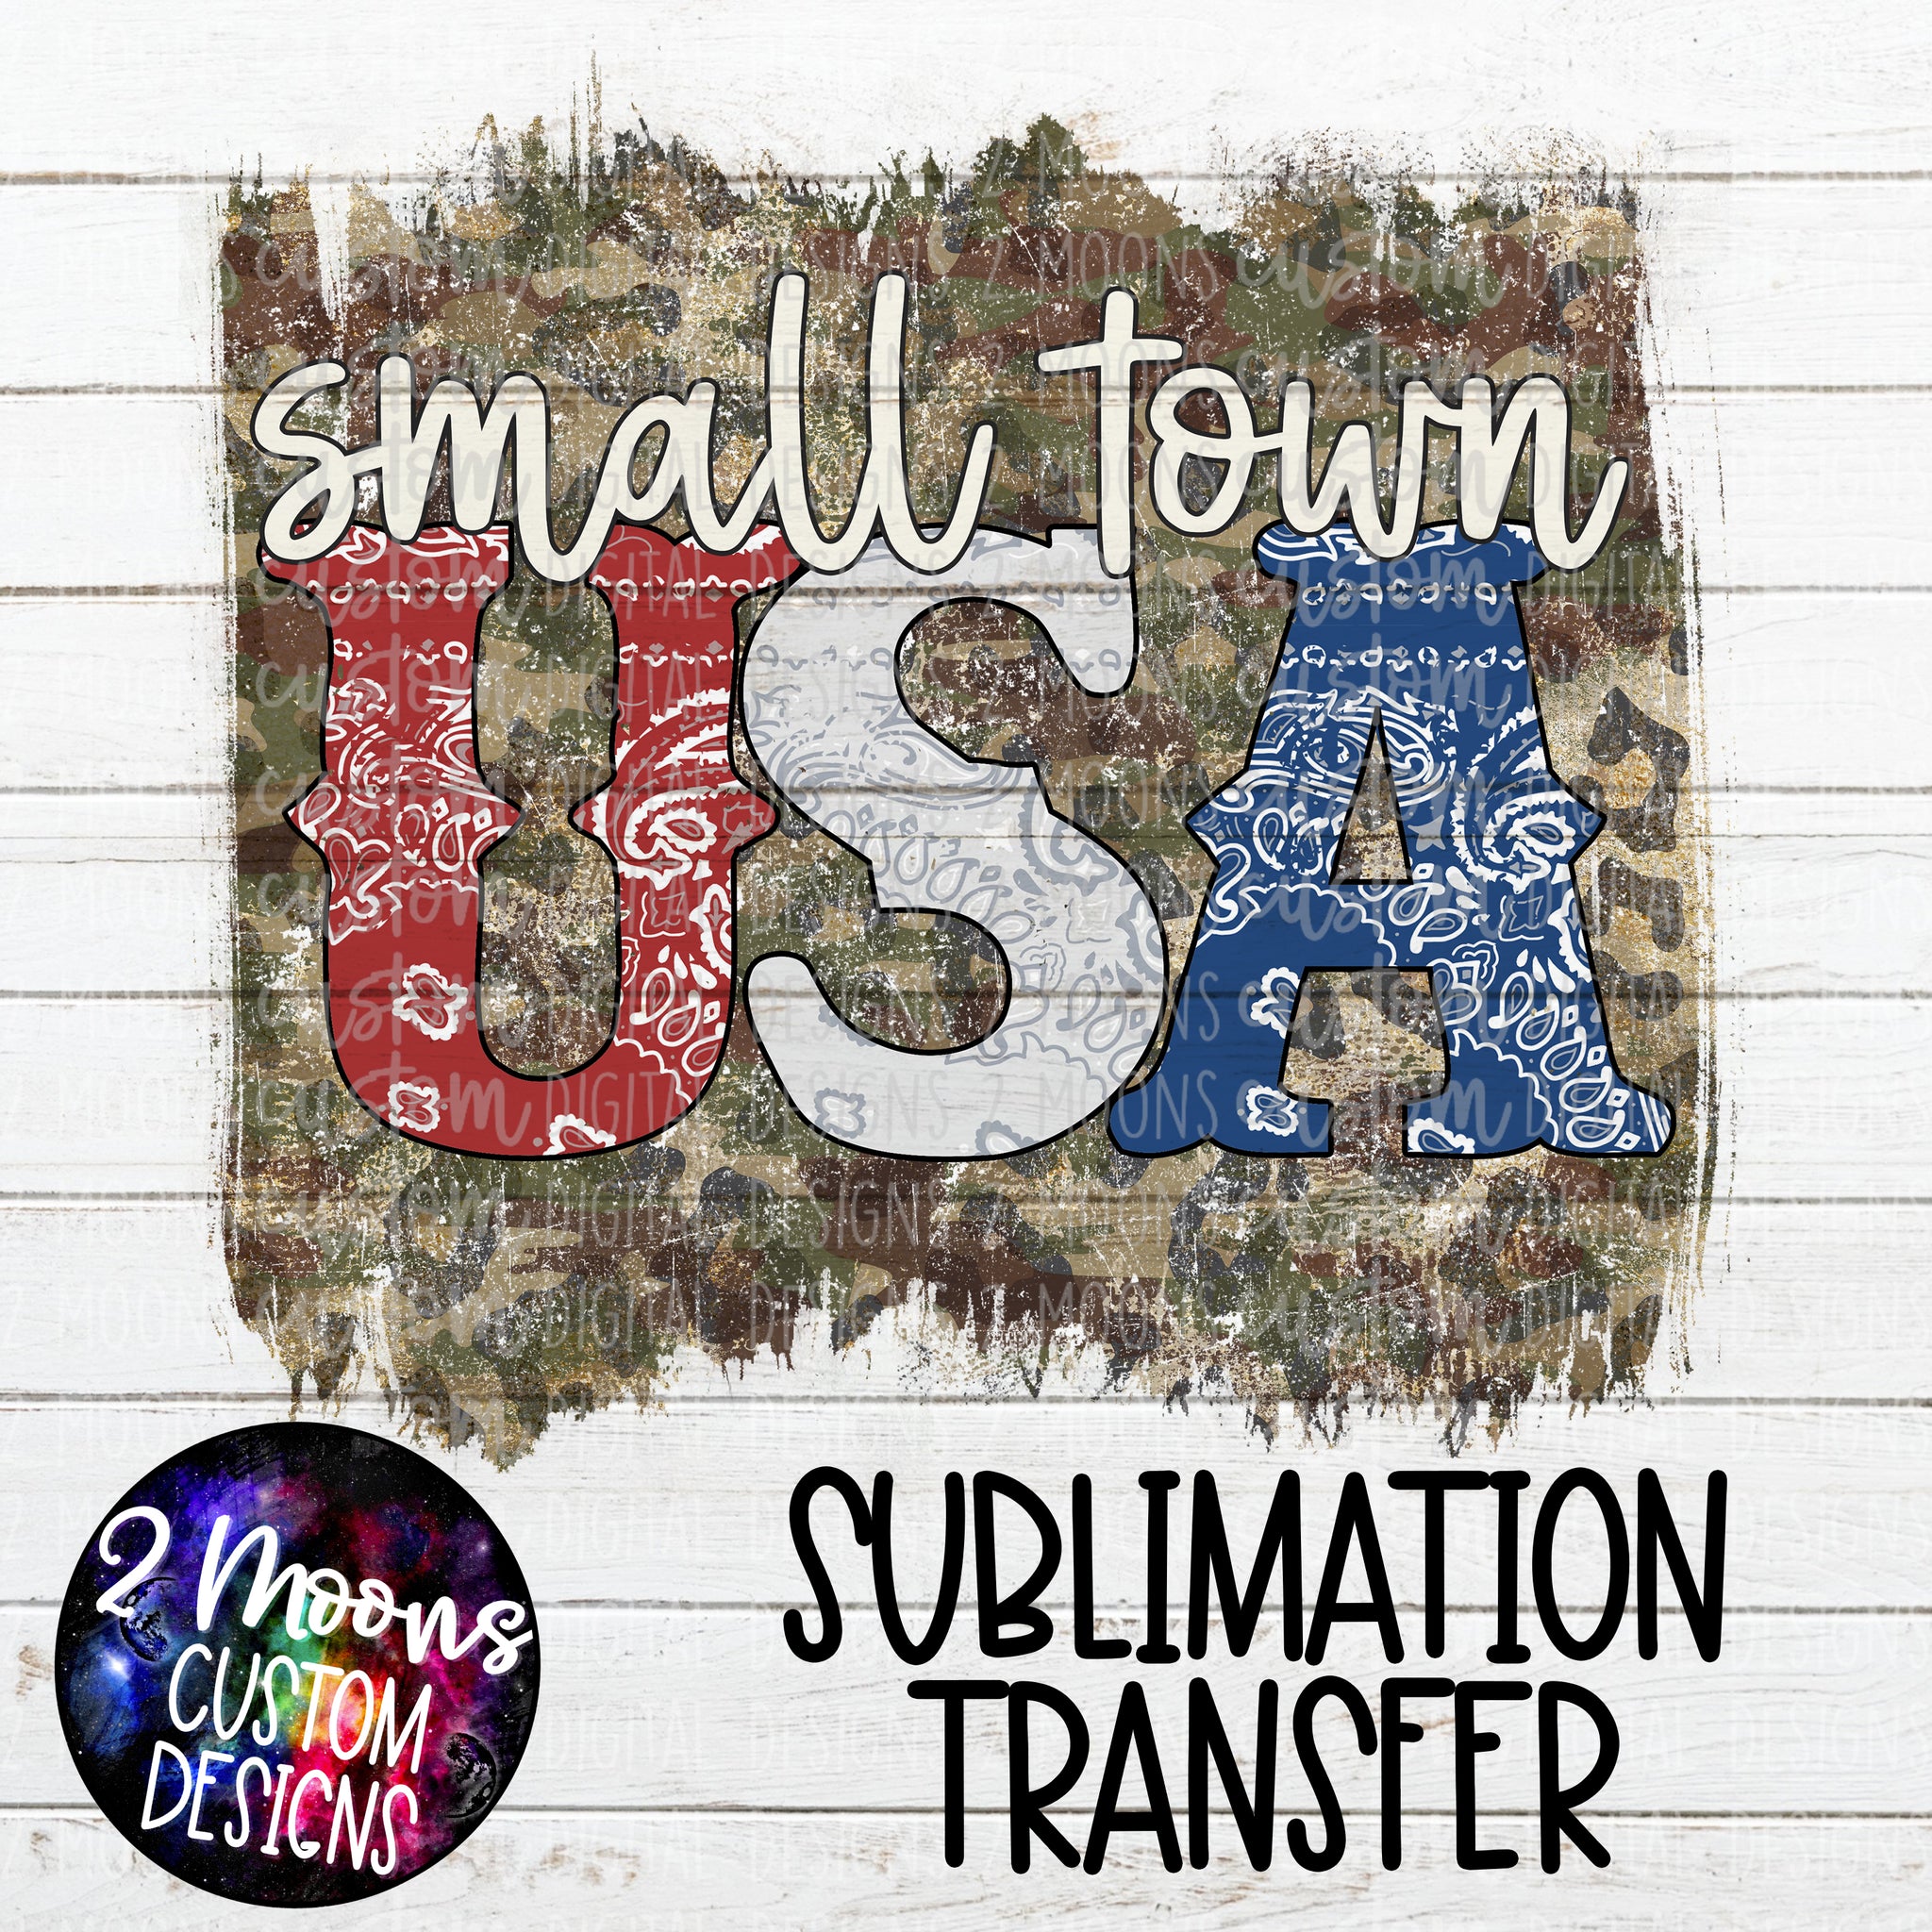 Small Town USA- Bandana Letters- Sublimation Transfer